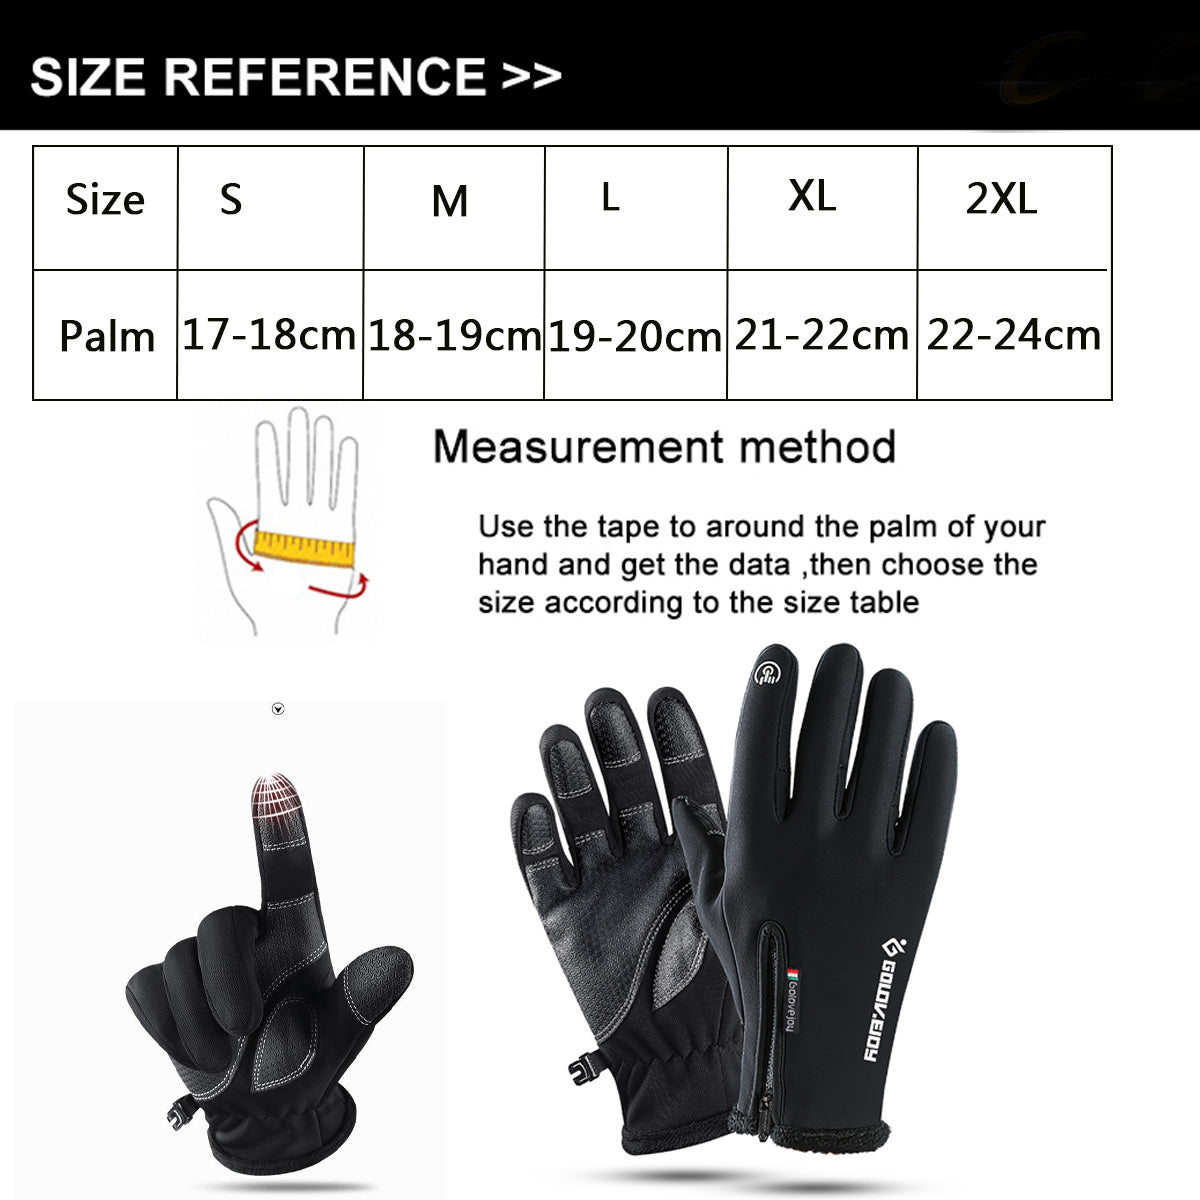 White Smoke Touch Screen Gloves Zipper Thermal Winter Sports Skiing Warm Mittens PU Leather Black